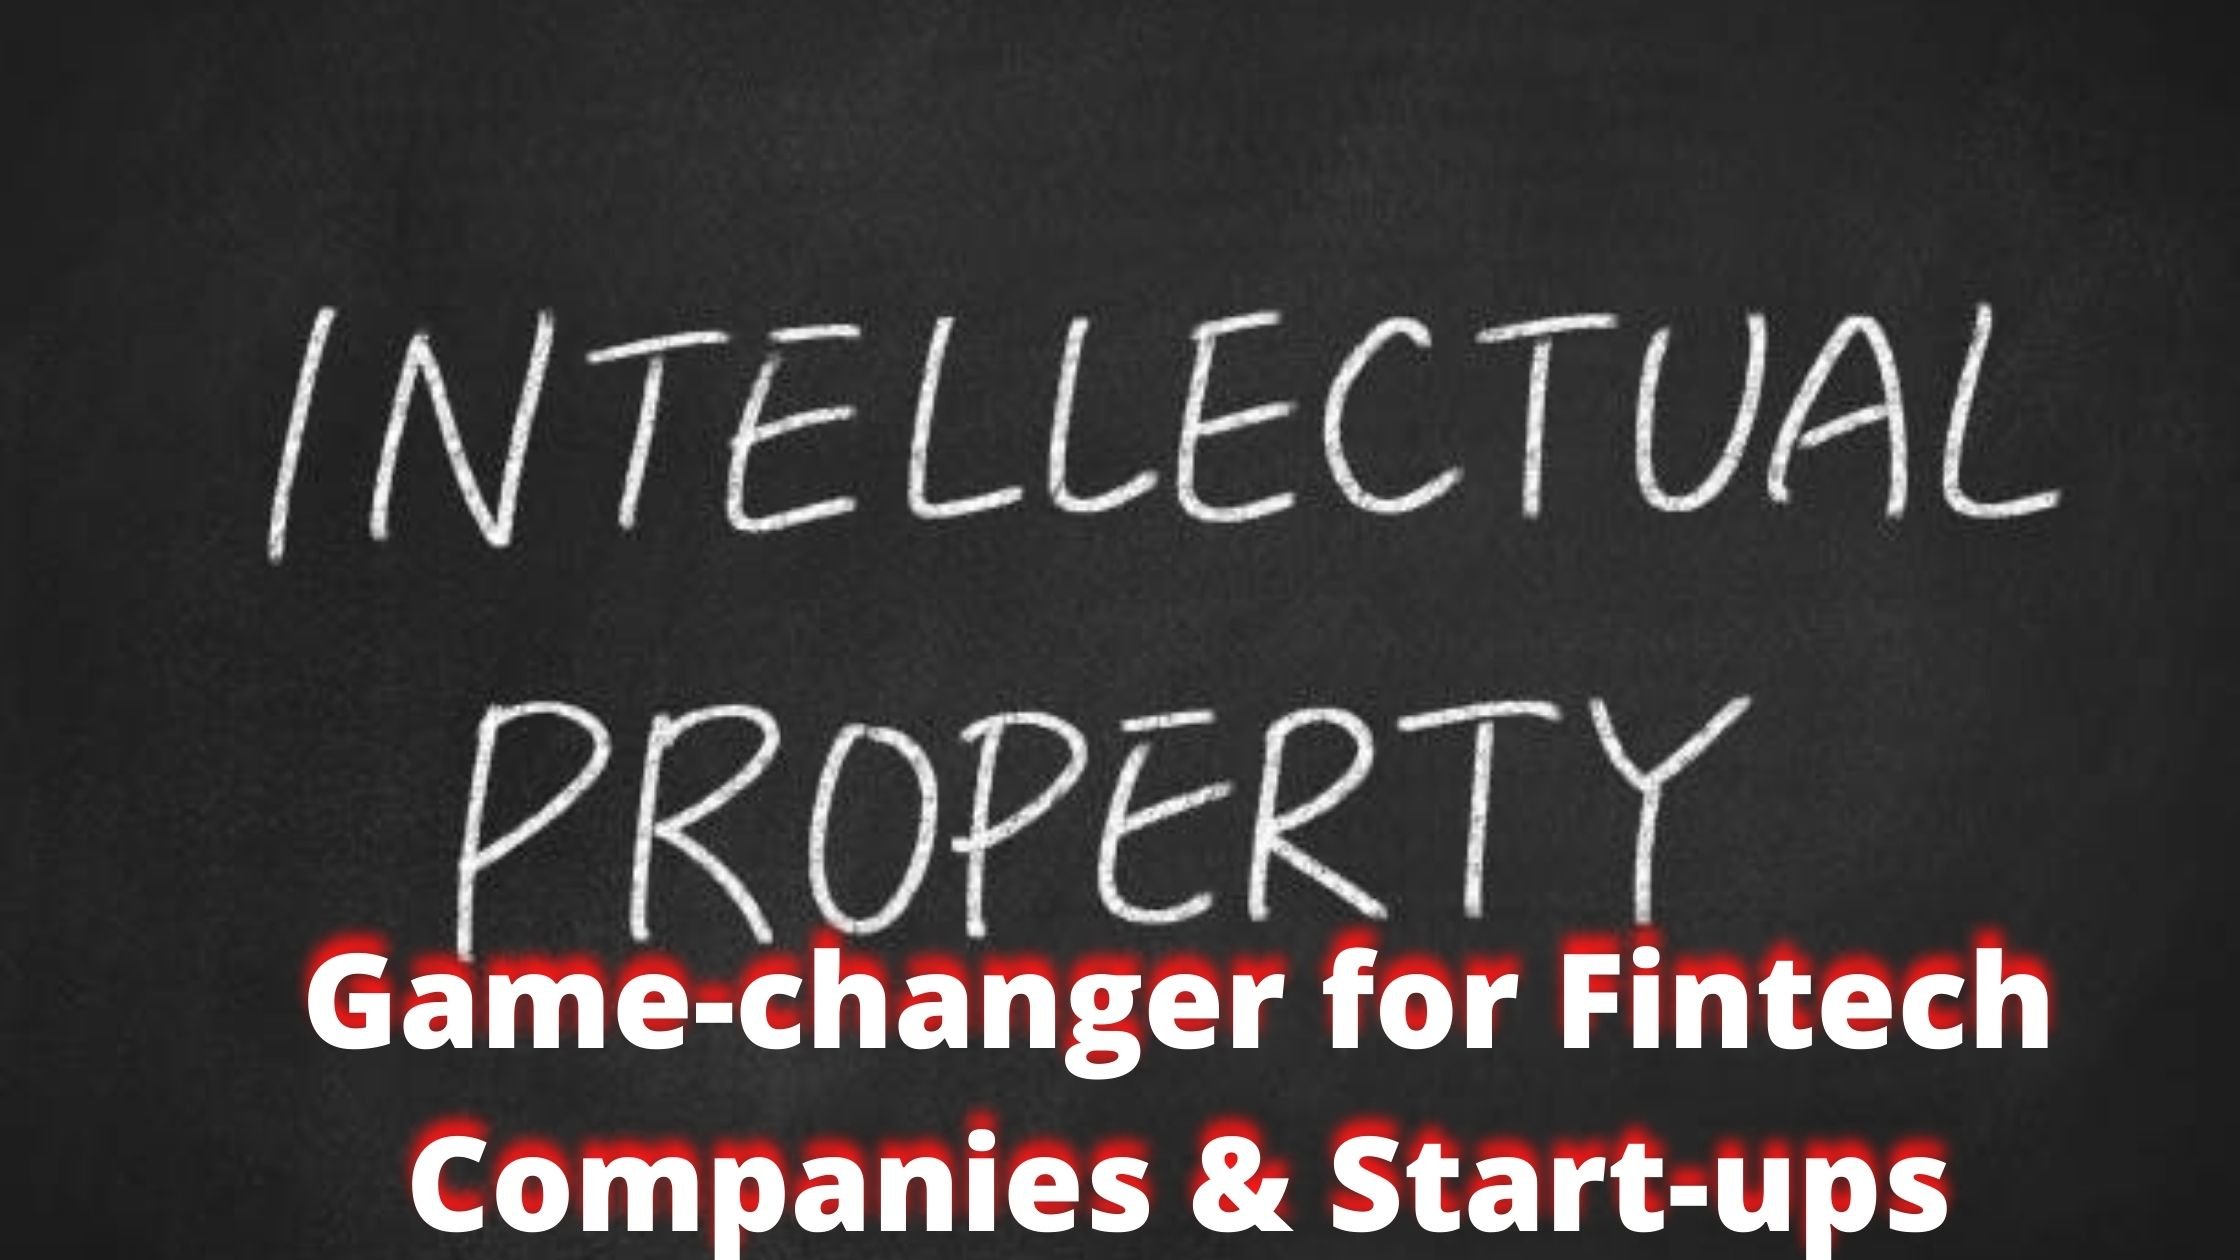 IPR- Game-changer for Fintech Companies and Start-ups